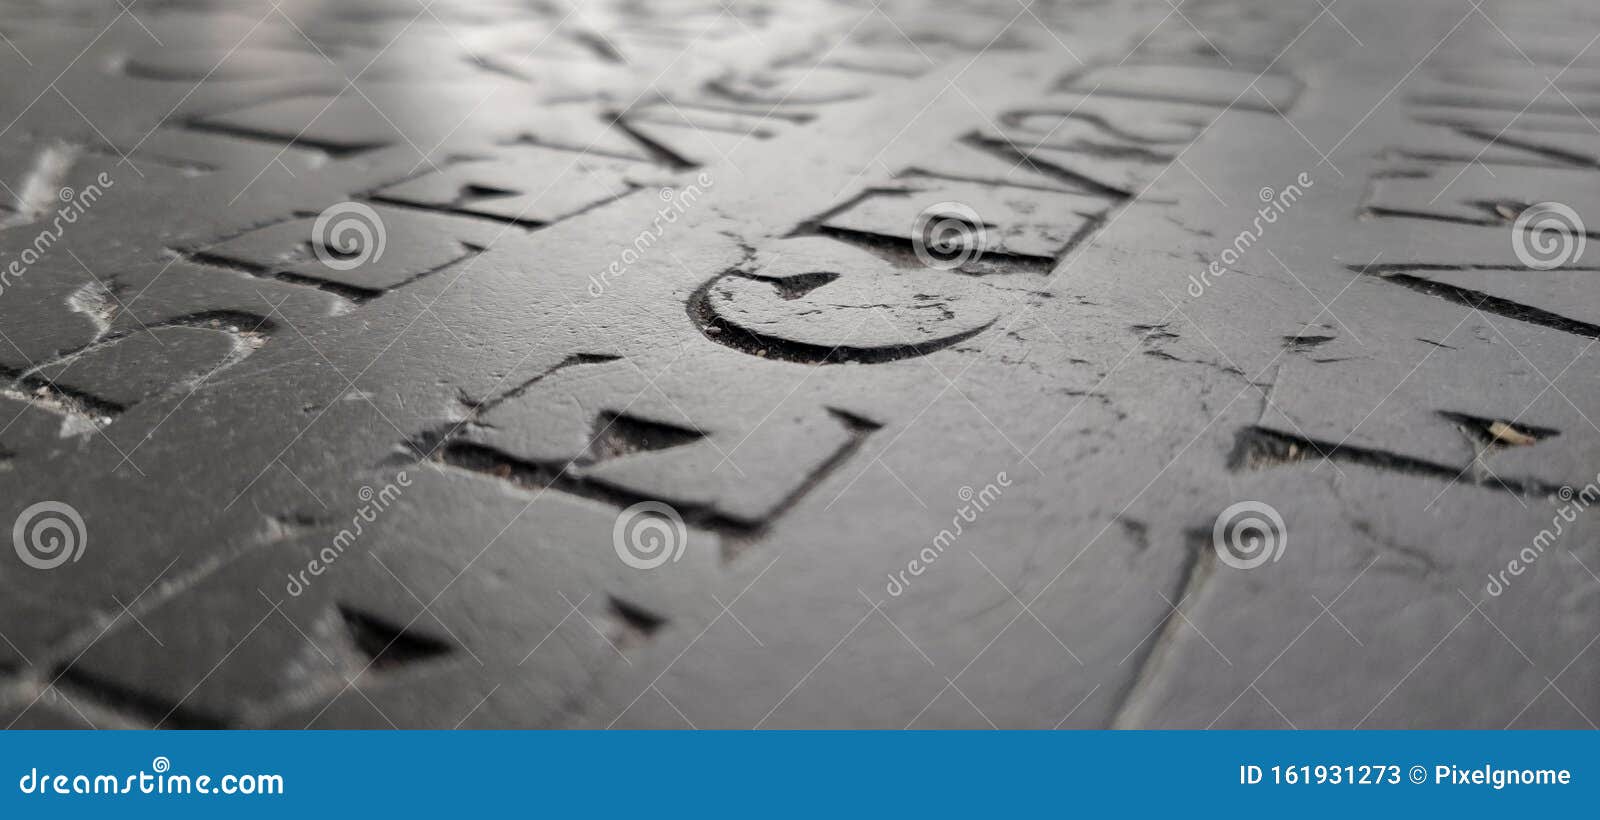 words etched in stone with dramatic light.